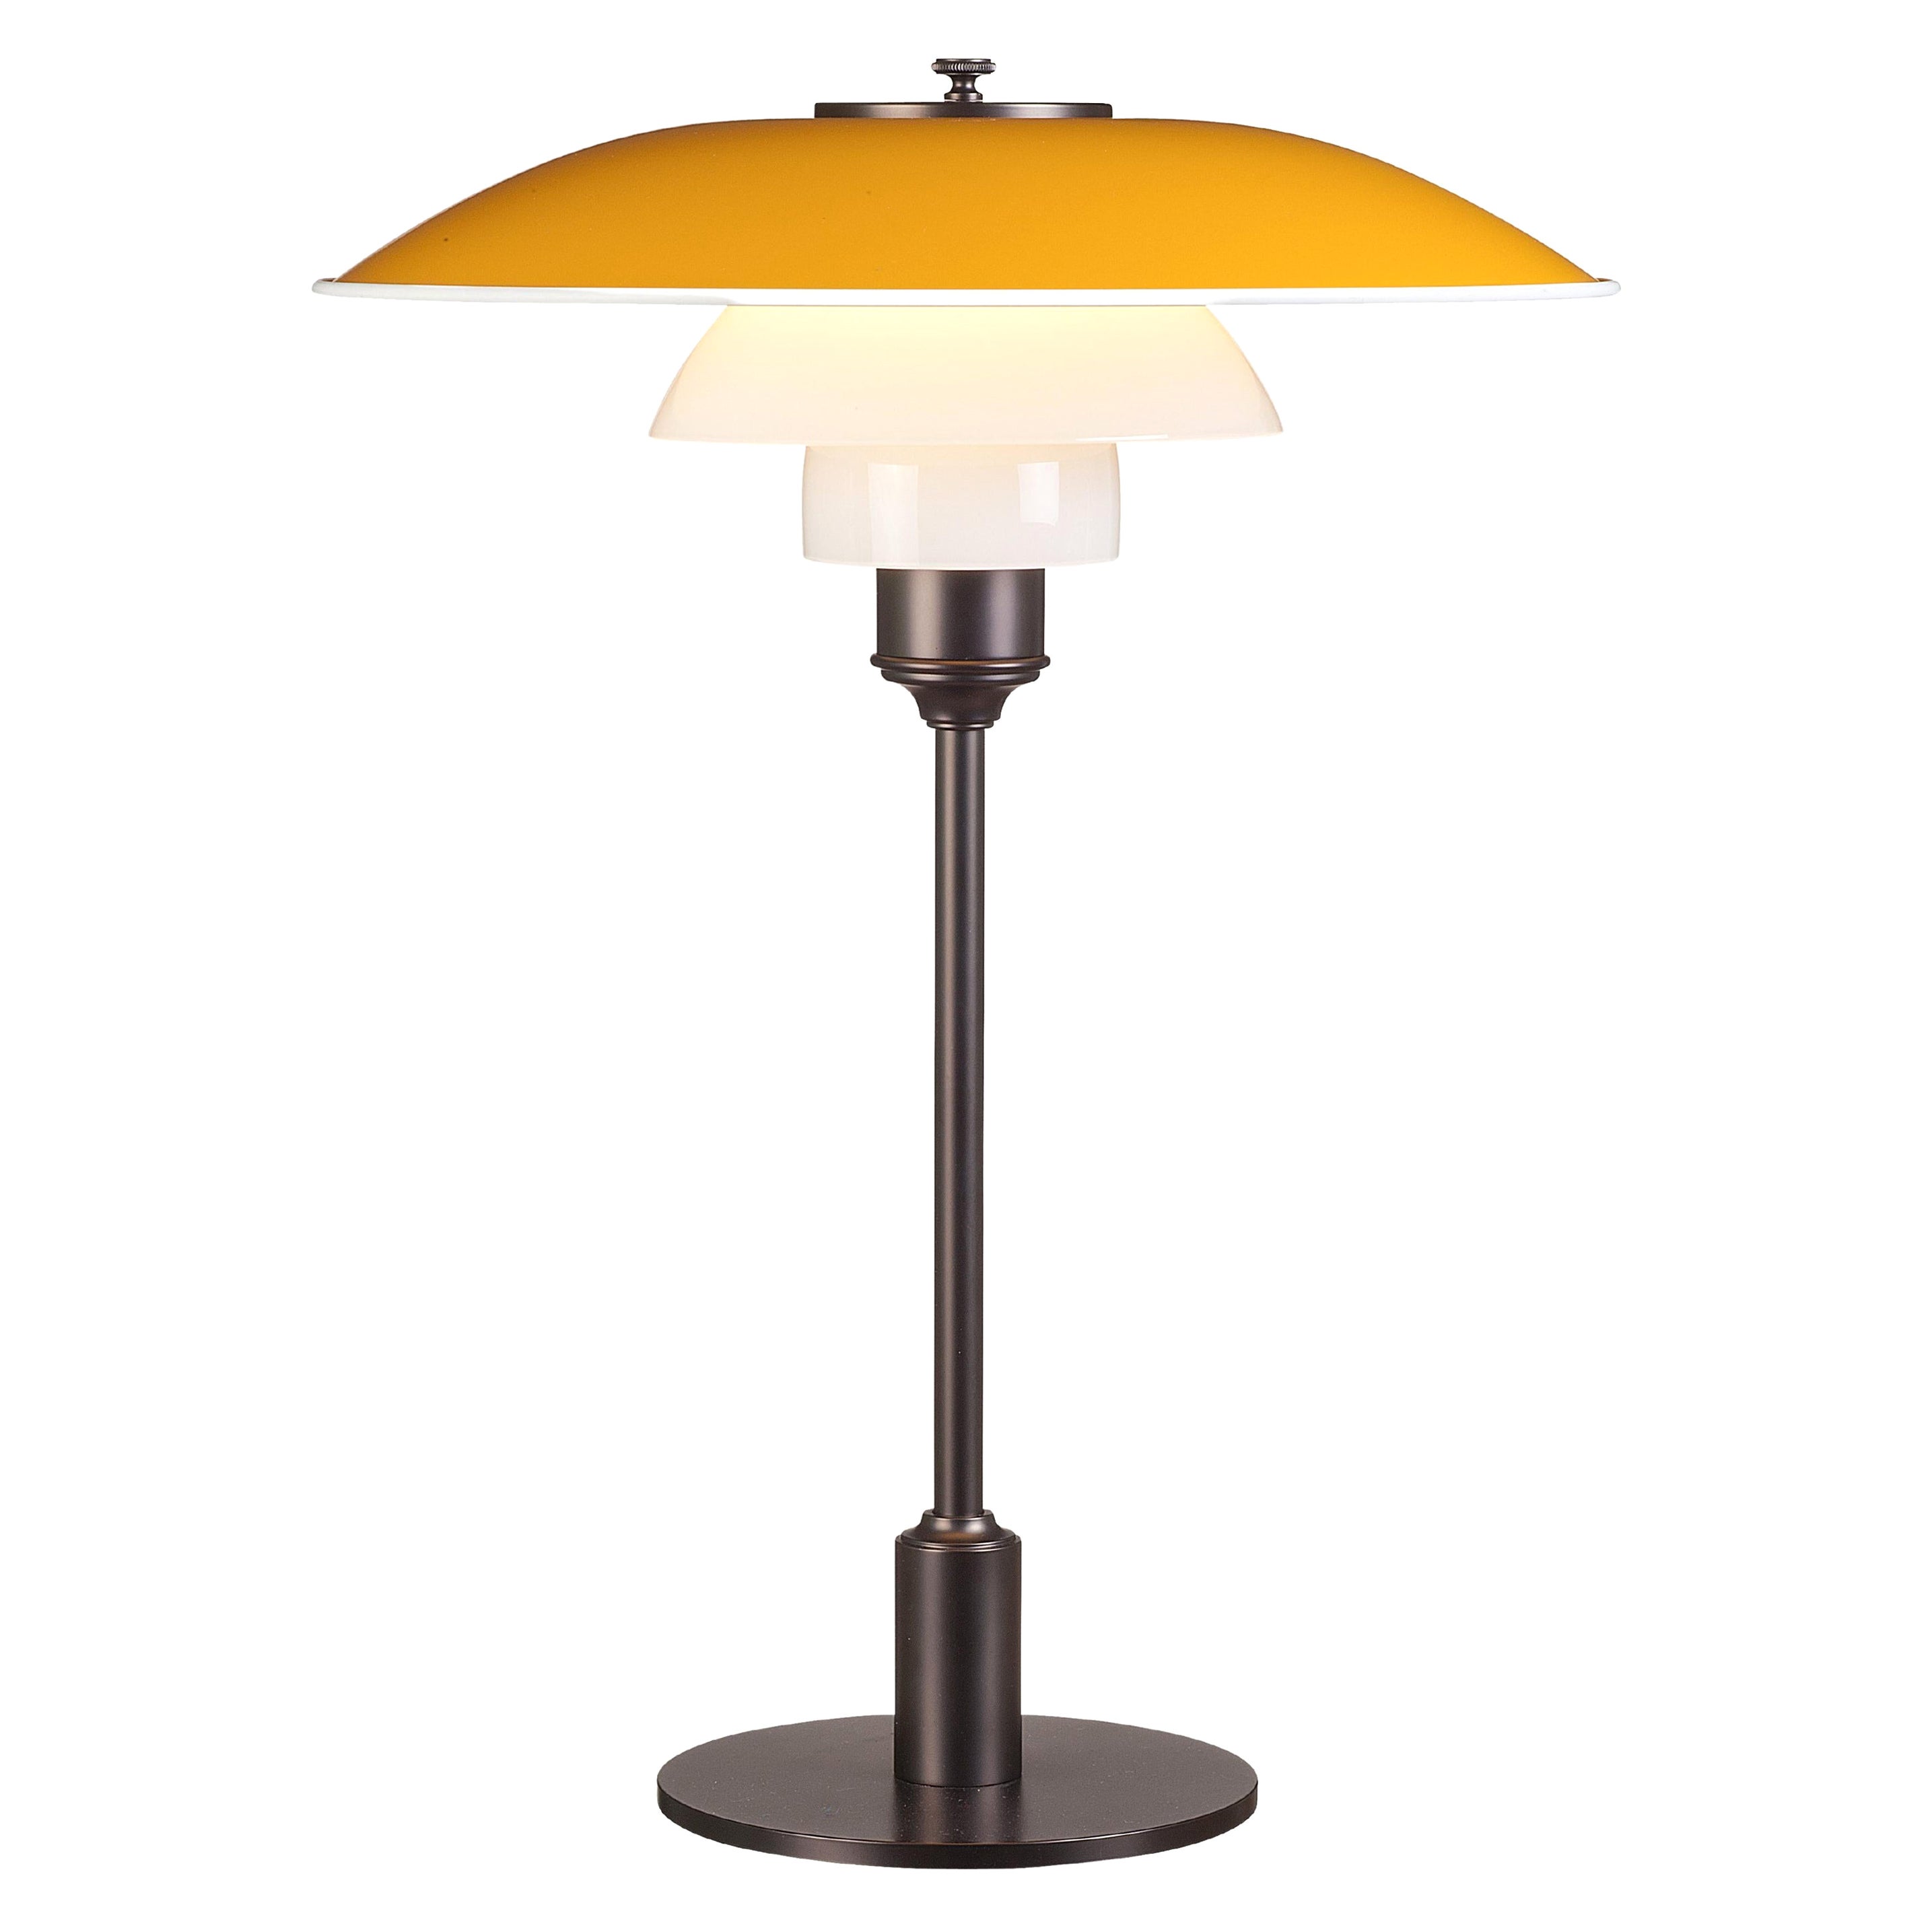 Poul Henningsen PH 3½-2½ Table Lamp for Louis Poulsen in Yellow For Sale